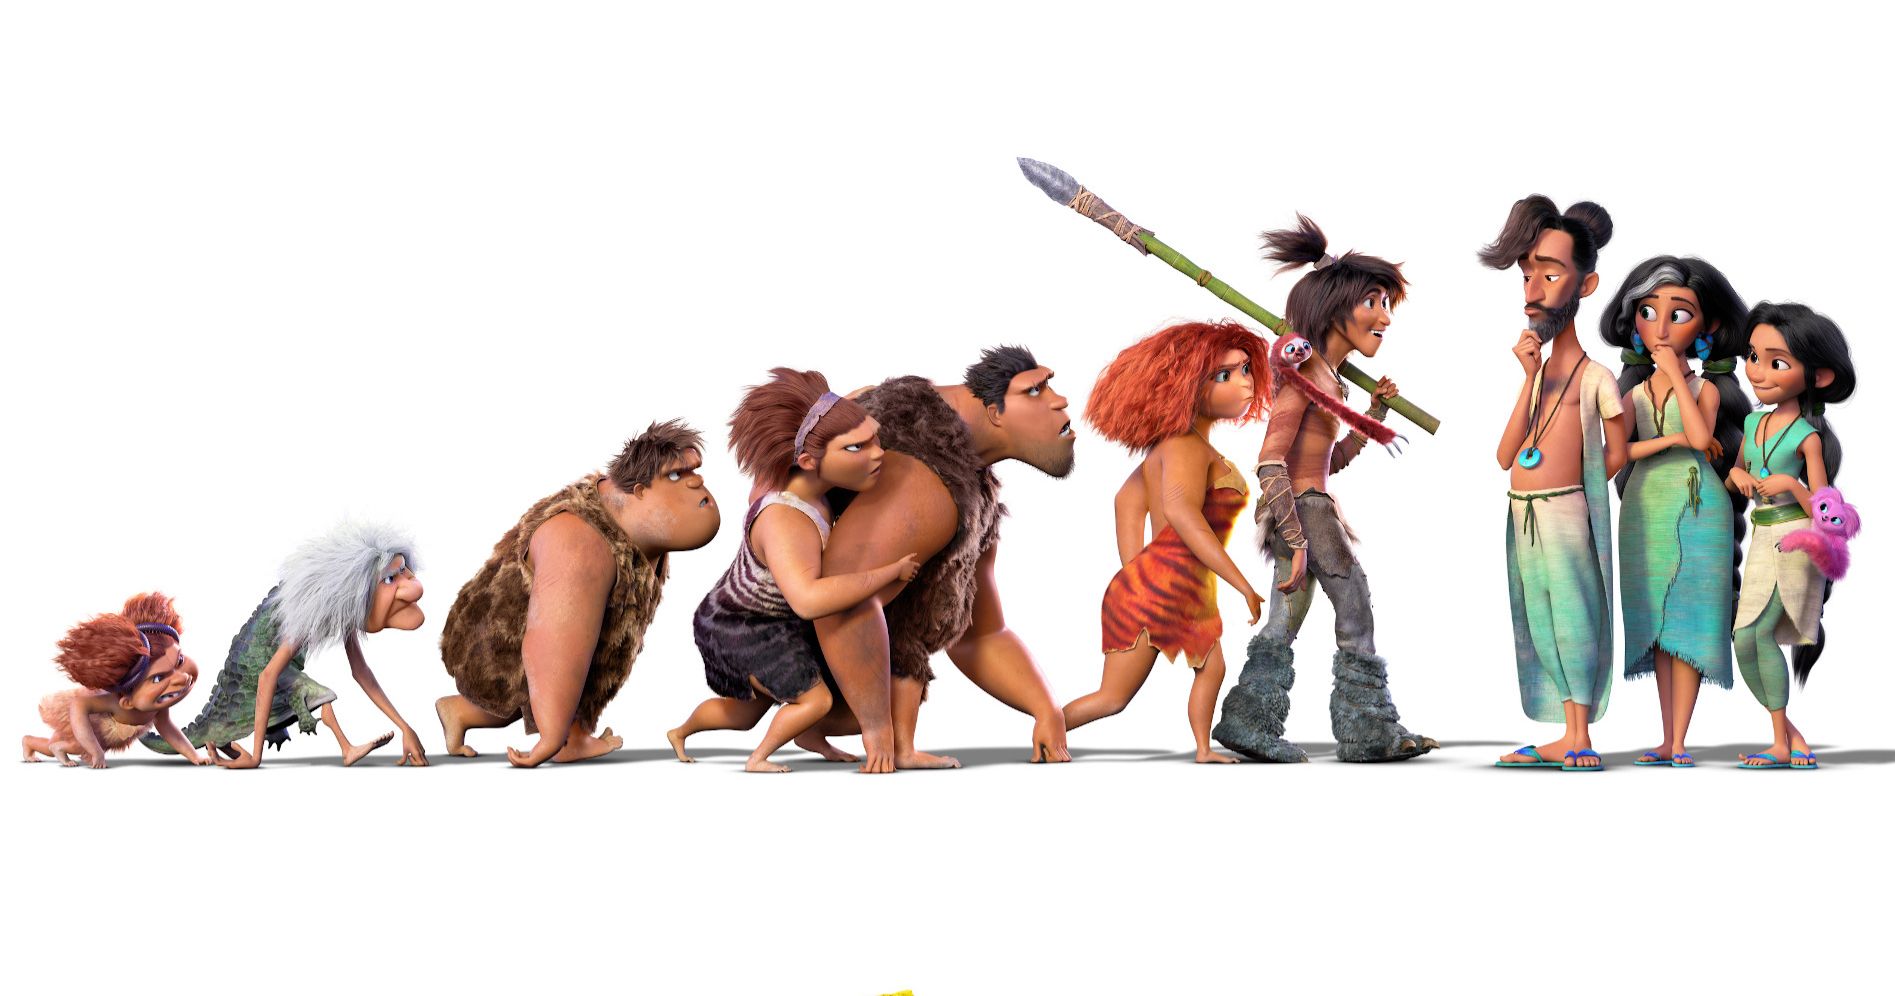 The Croods 2 Poster Confirms Thanksgiving Release Date in Theaters